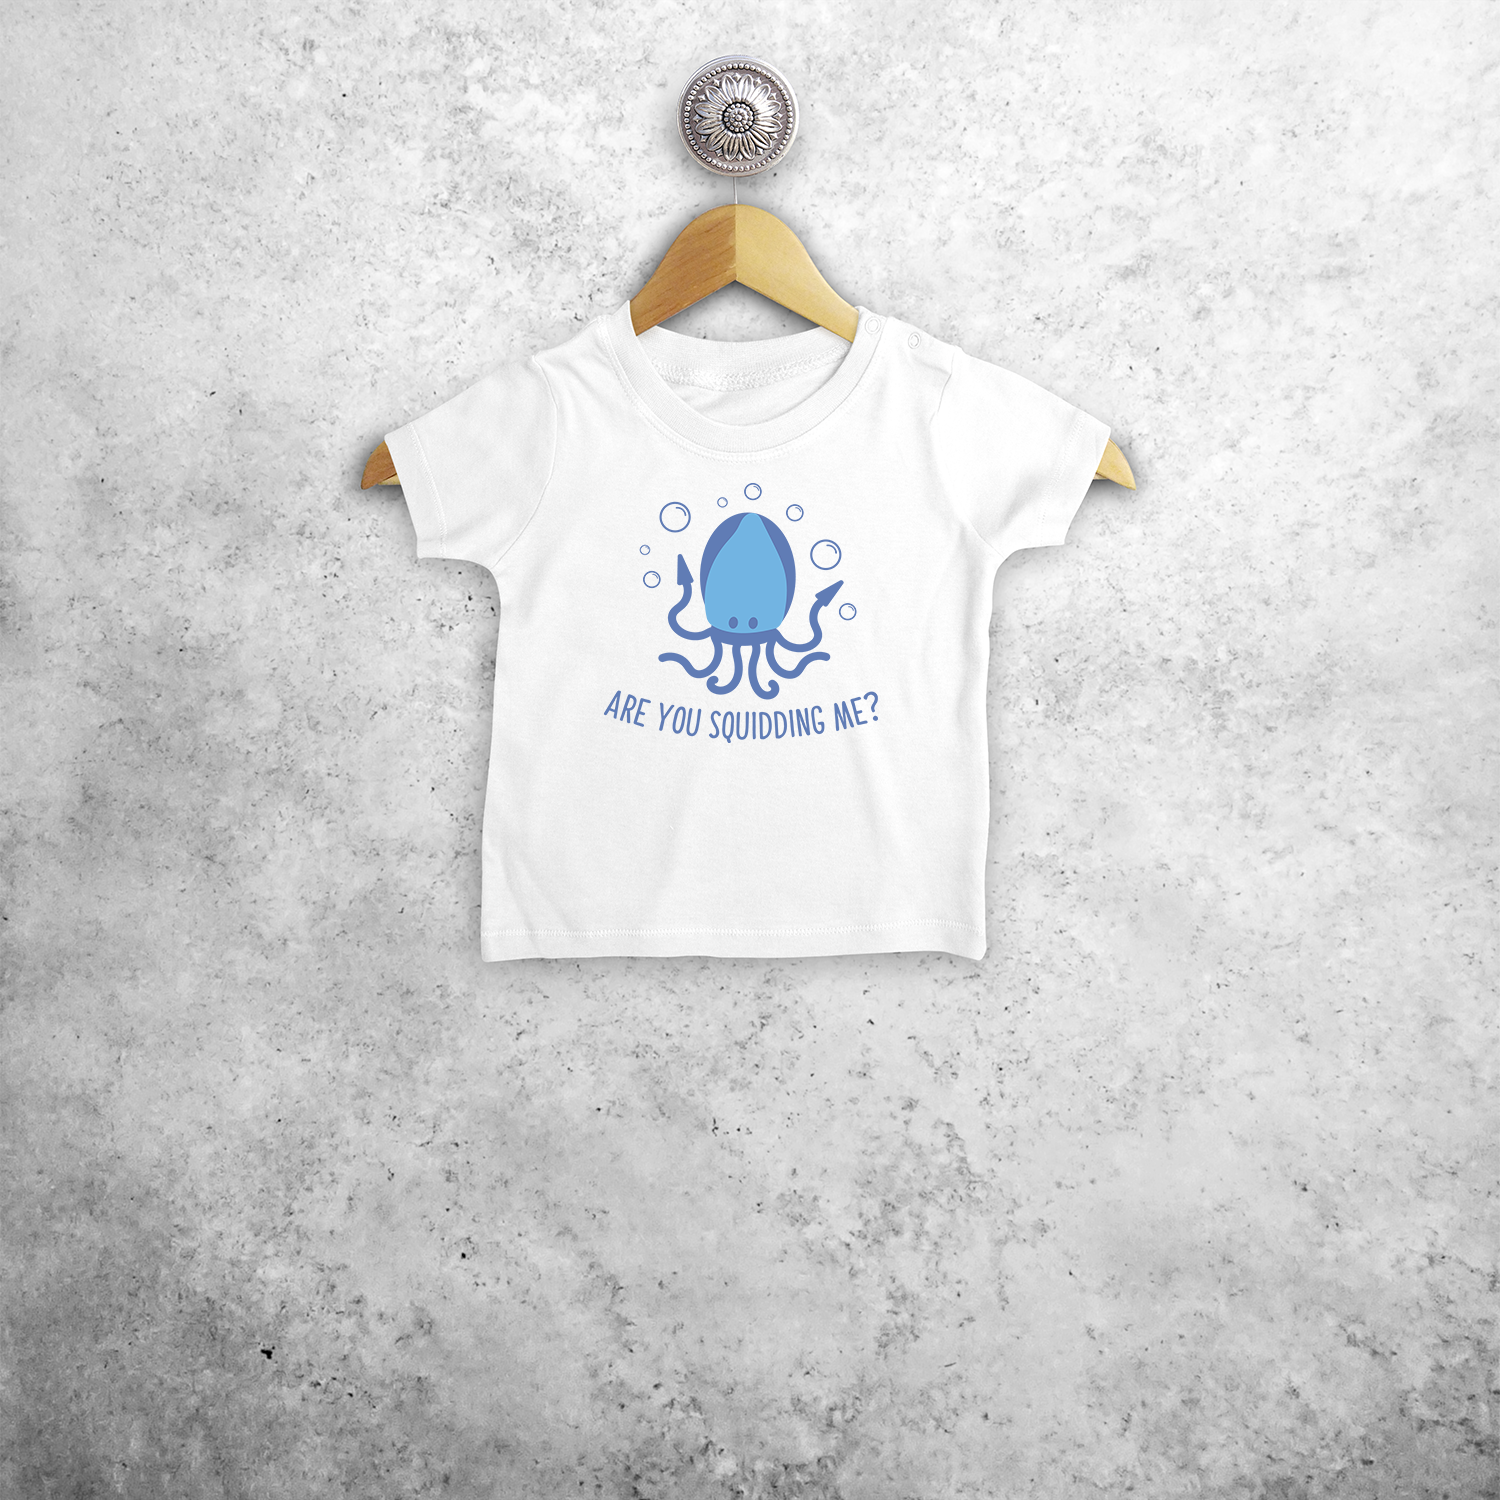 'Are you squidding me?' baby shortsleeve shirt